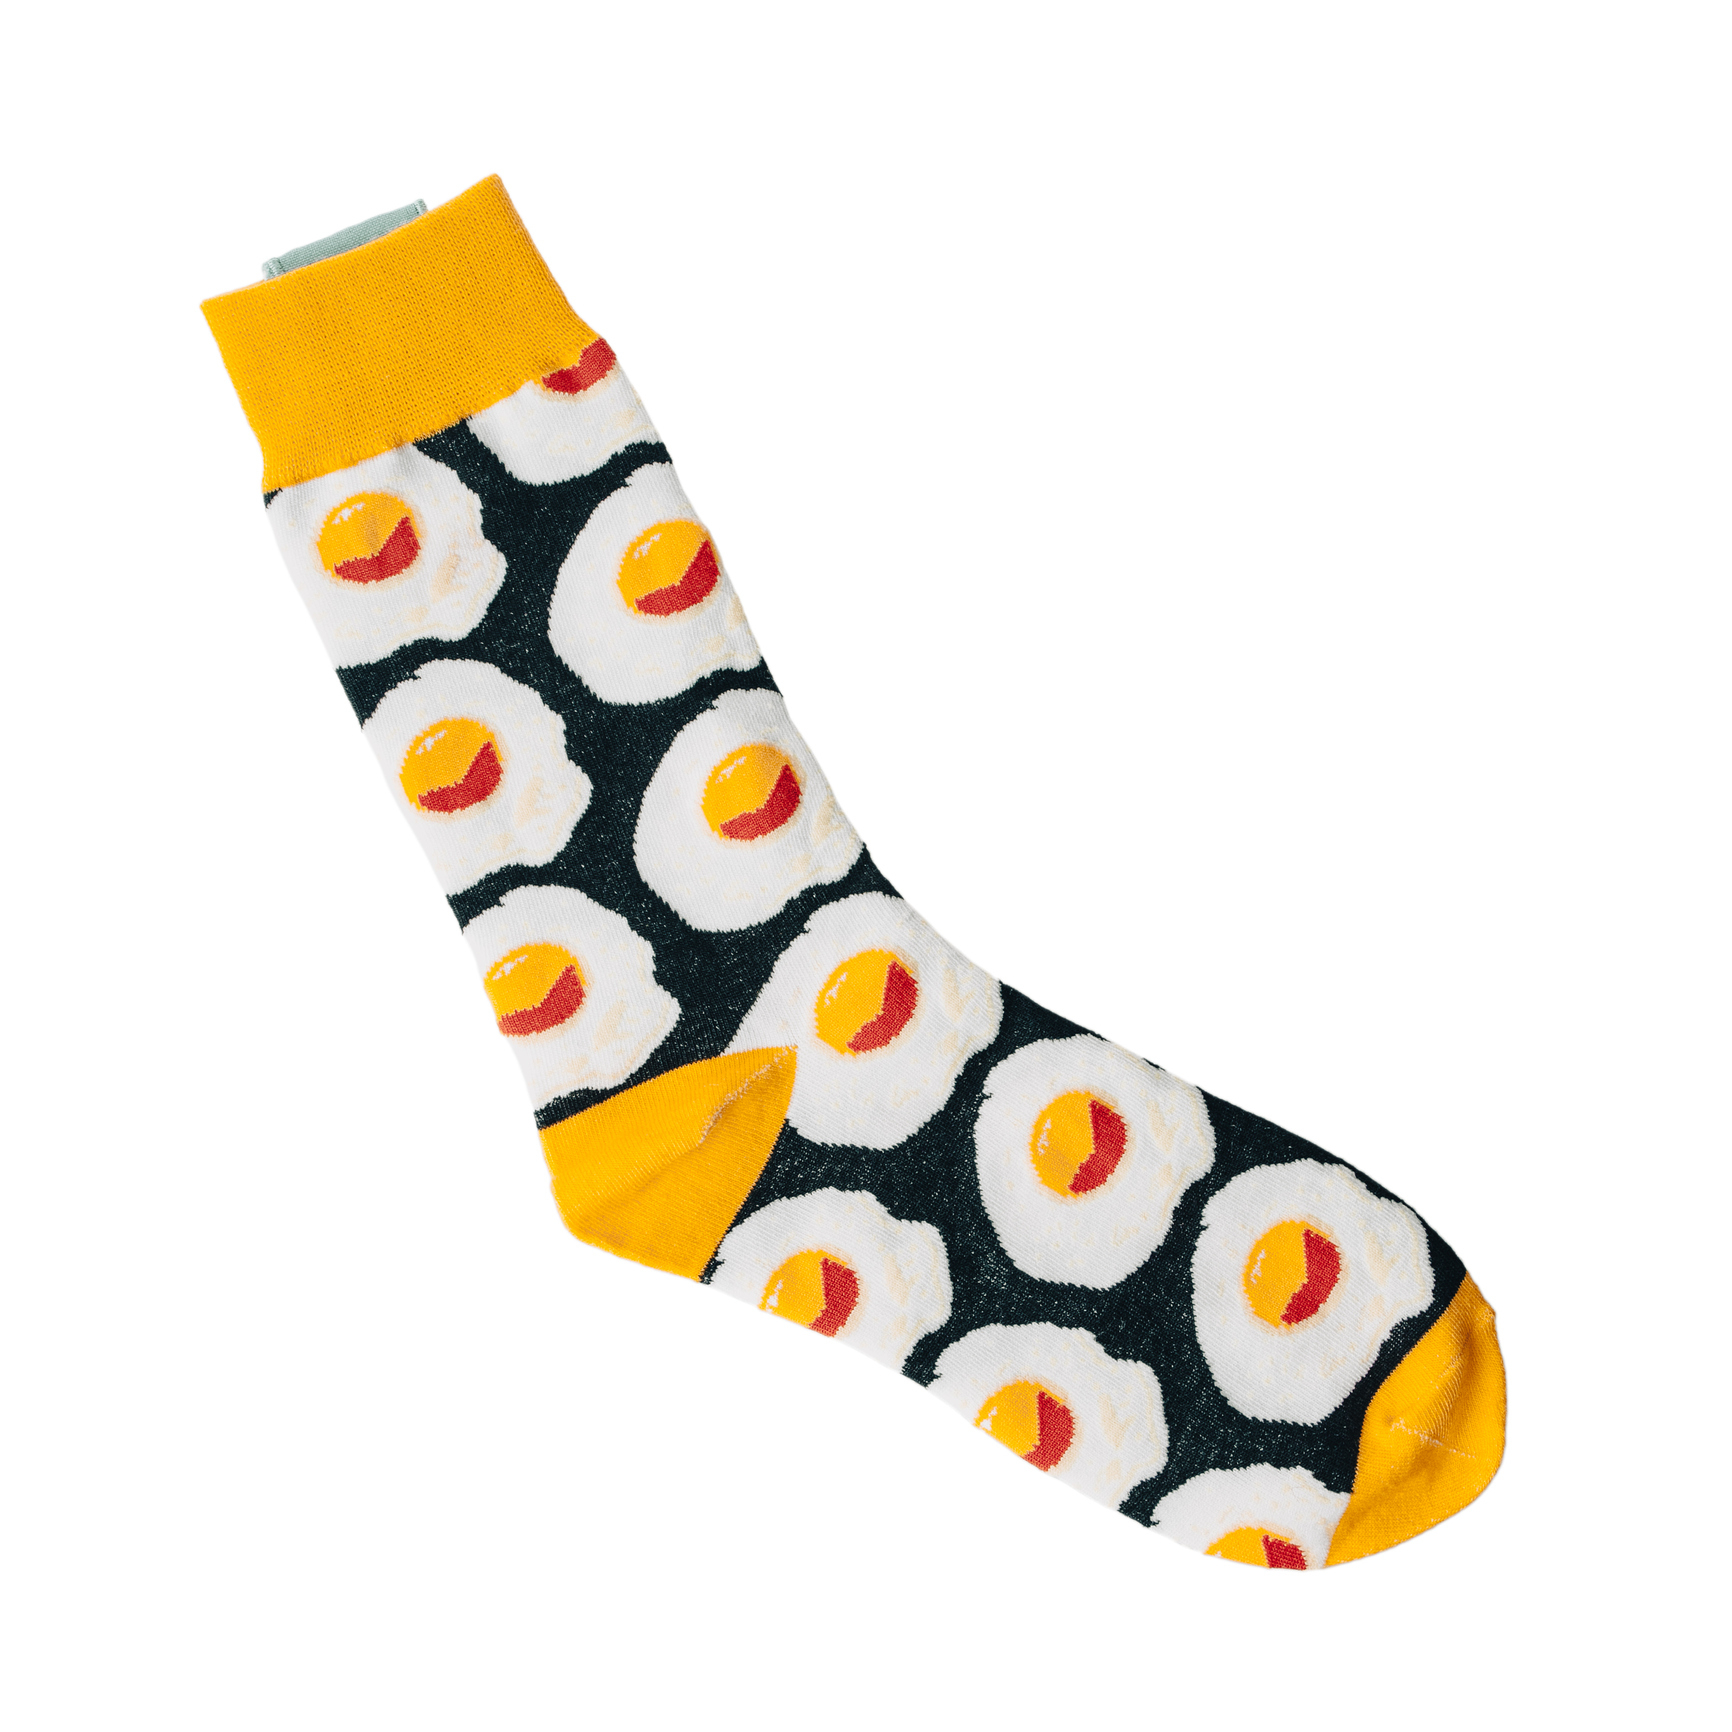 A colorful, novelty sock on a white background